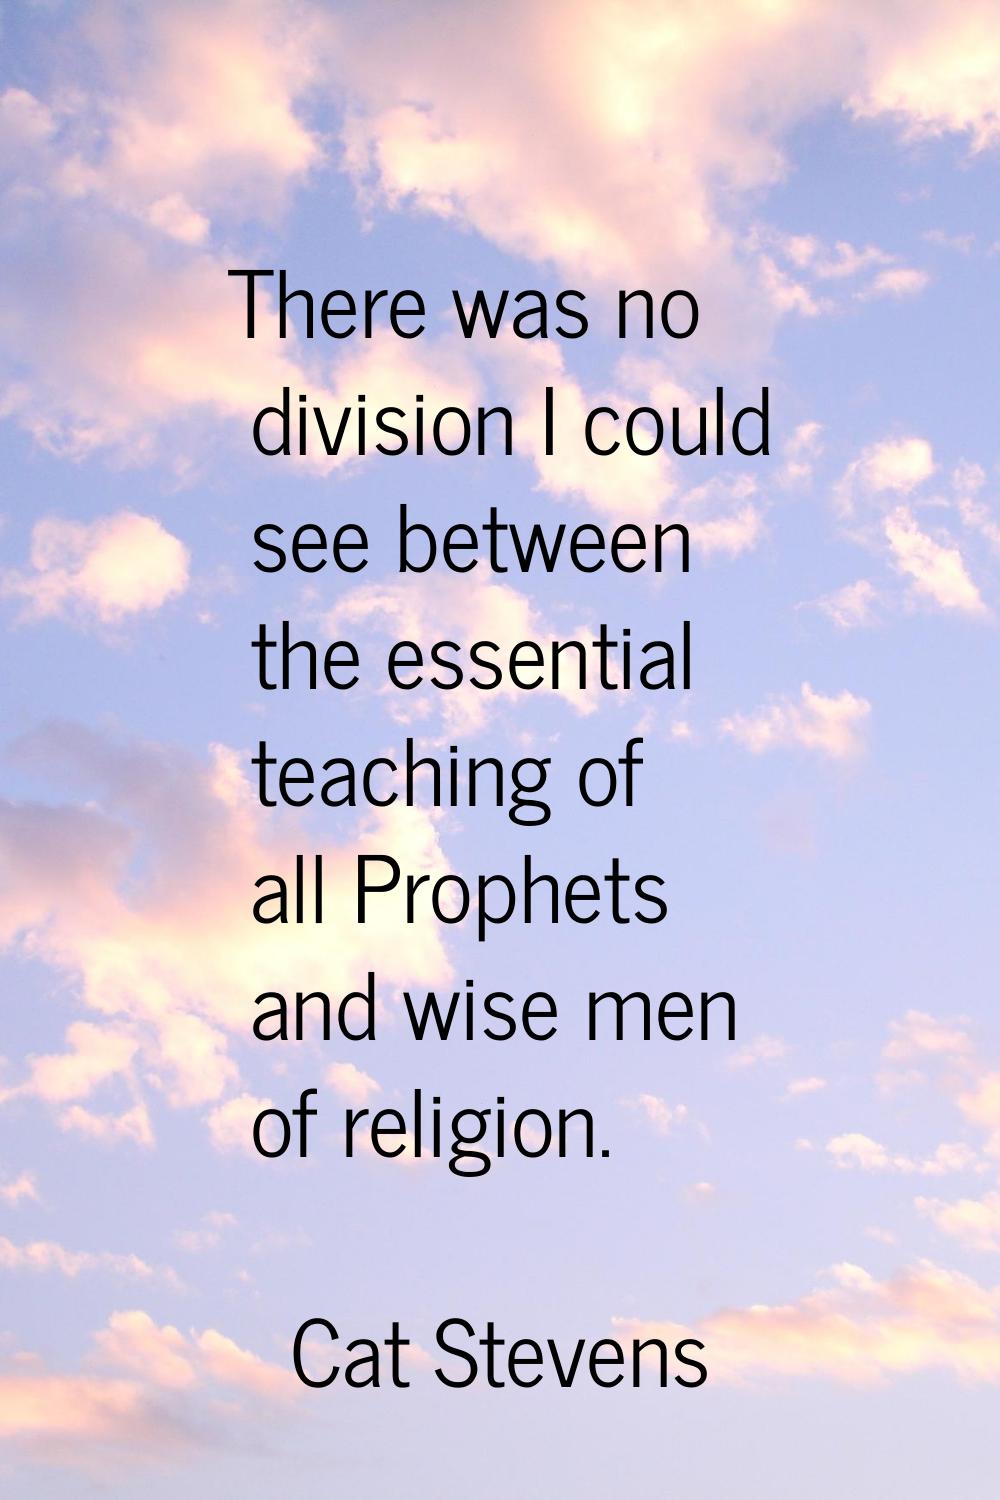 There was no division I could see between the essential teaching of all Prophets and wise men of re